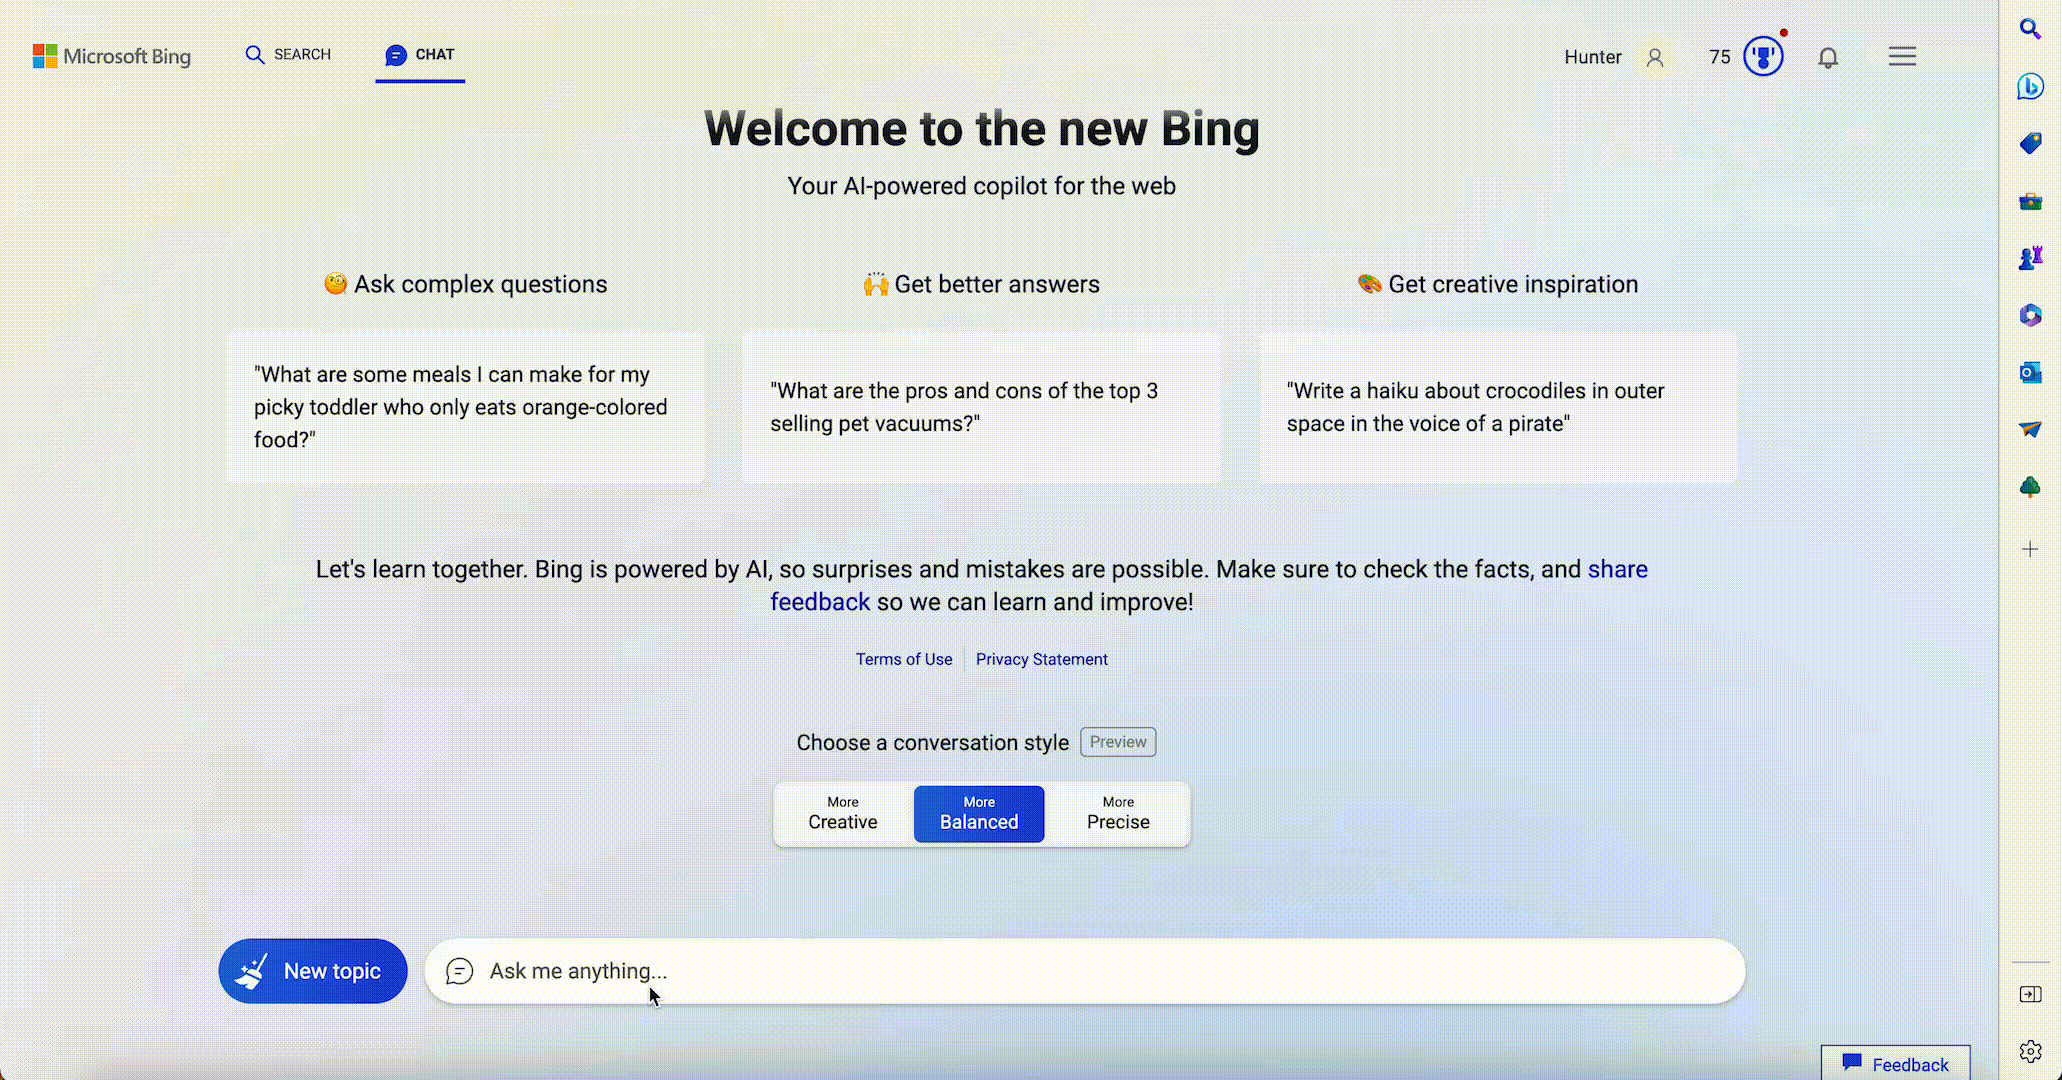 bing ai chat slow response time / The New Bing: 5 Major Shortcomings of Bing Chat / Beyond Blue Media